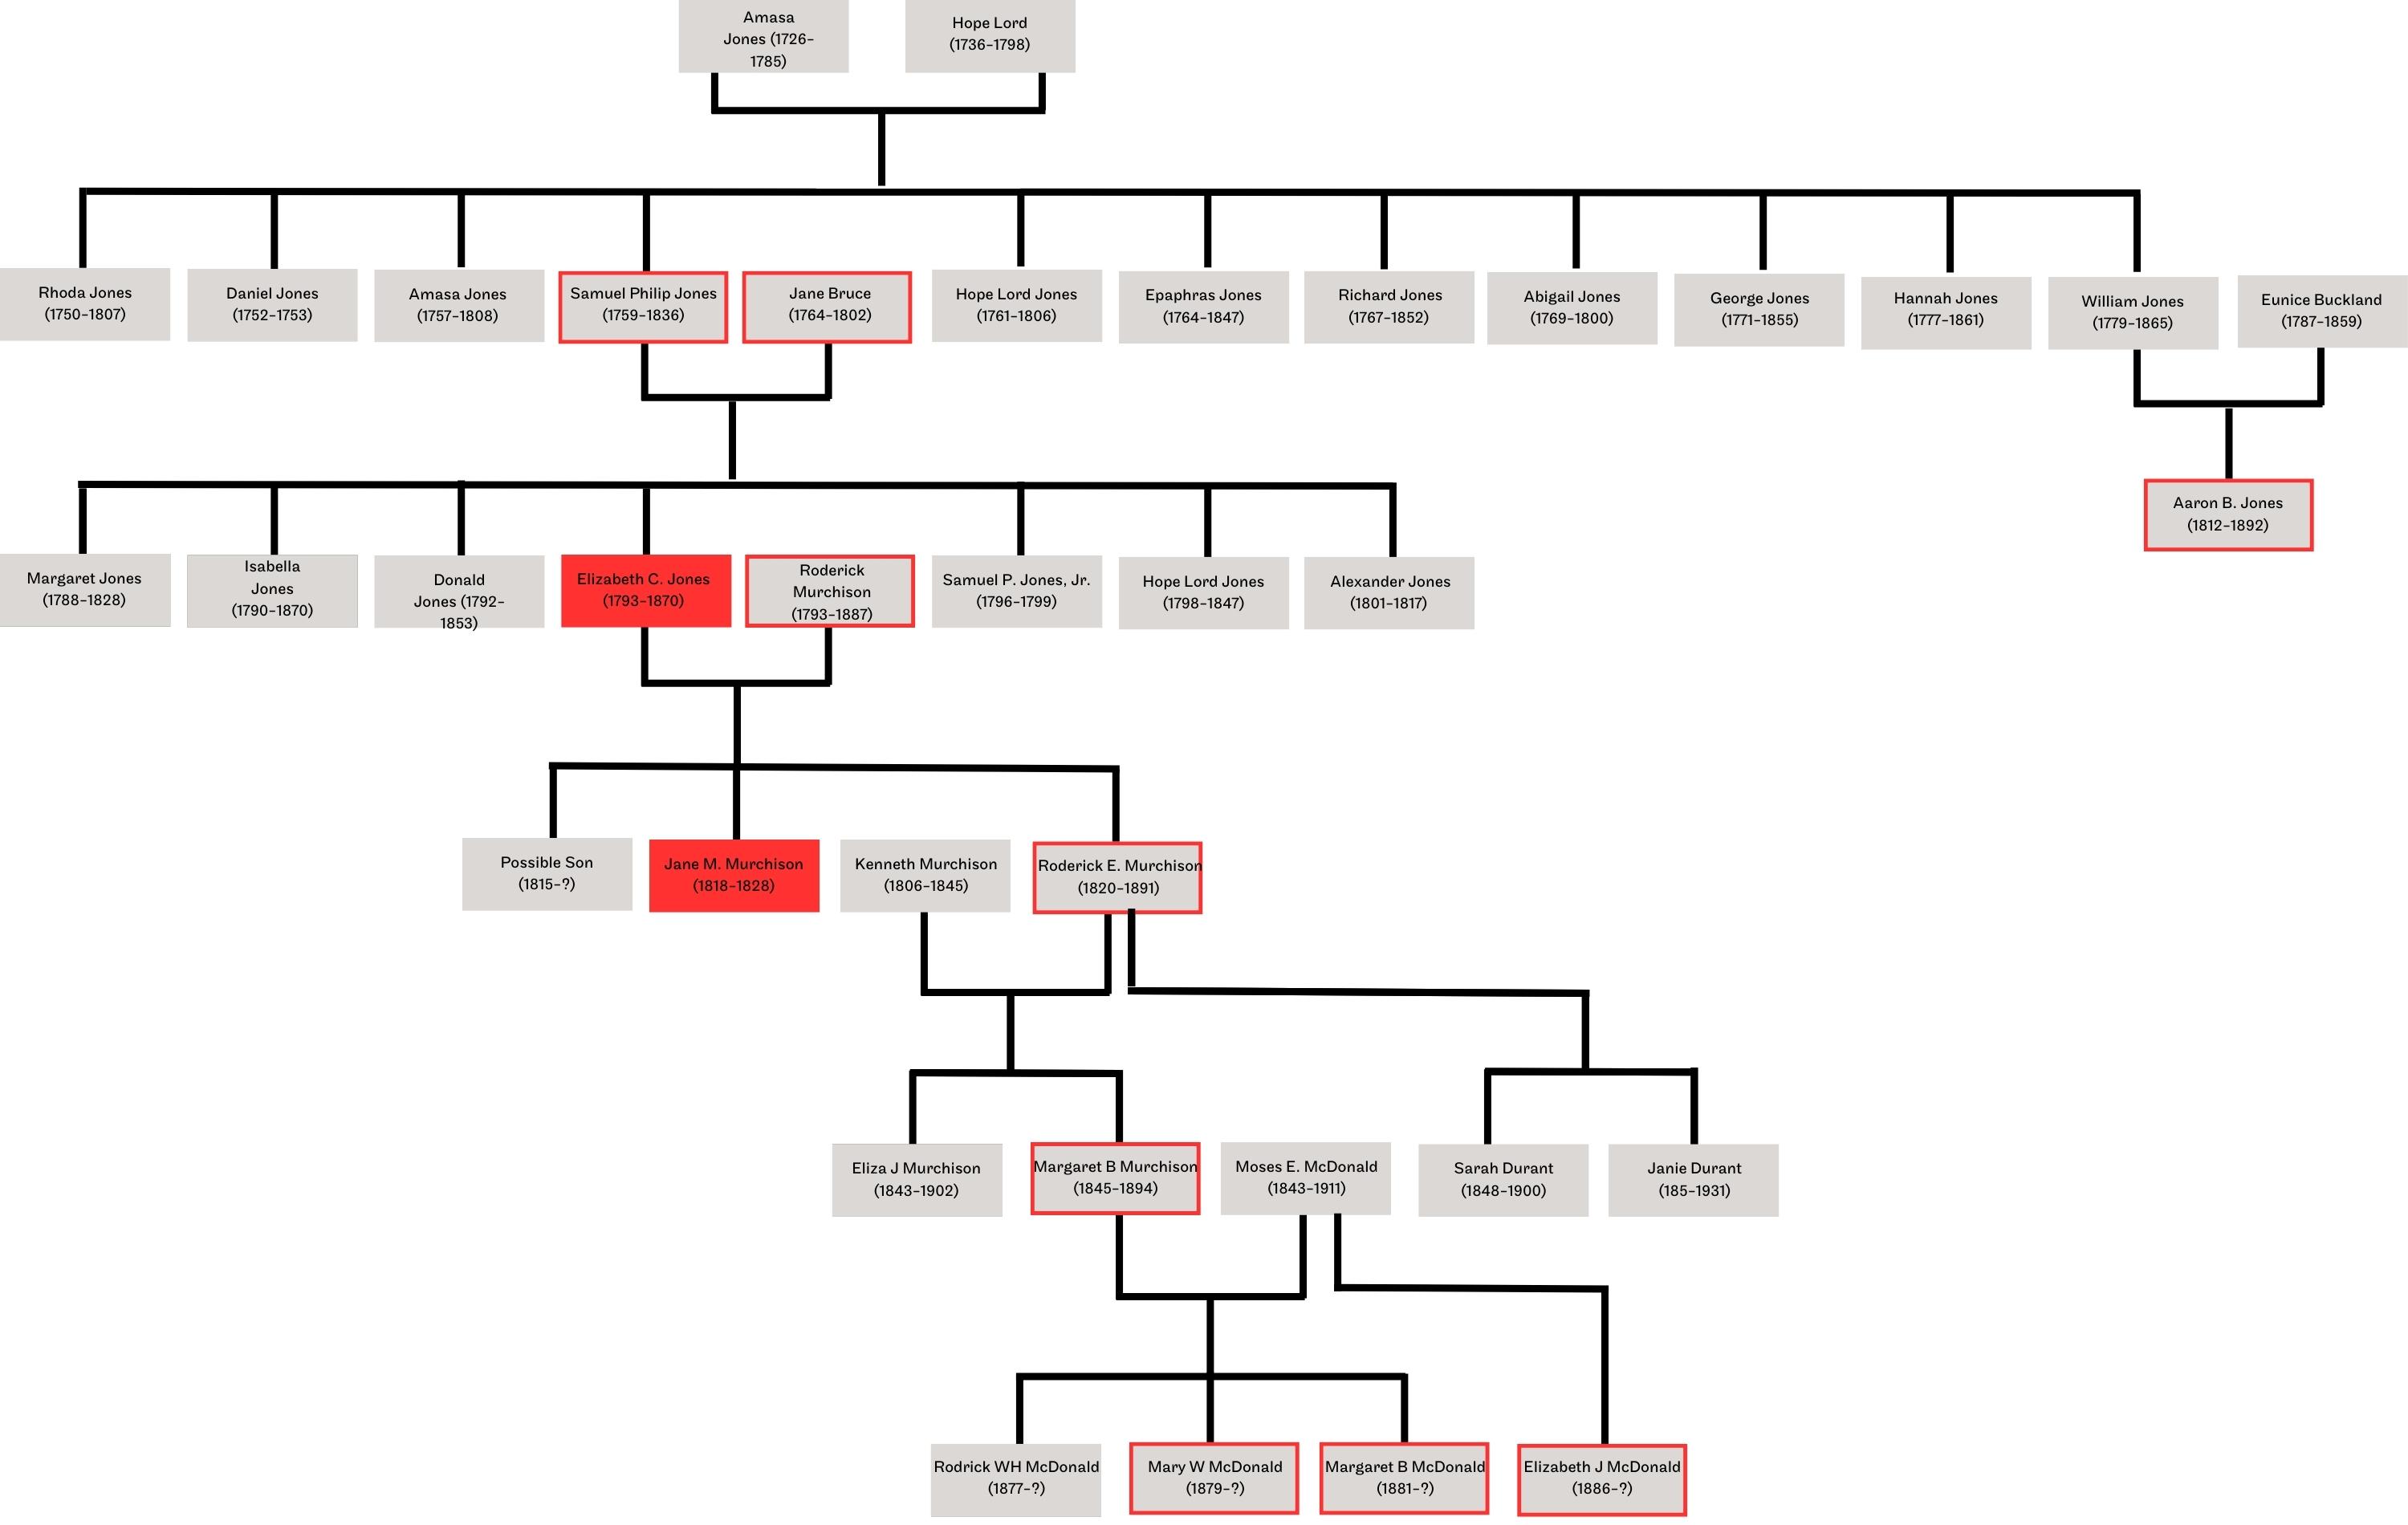 Murchison, Jones and McDonald family tree. Compiled by the author.